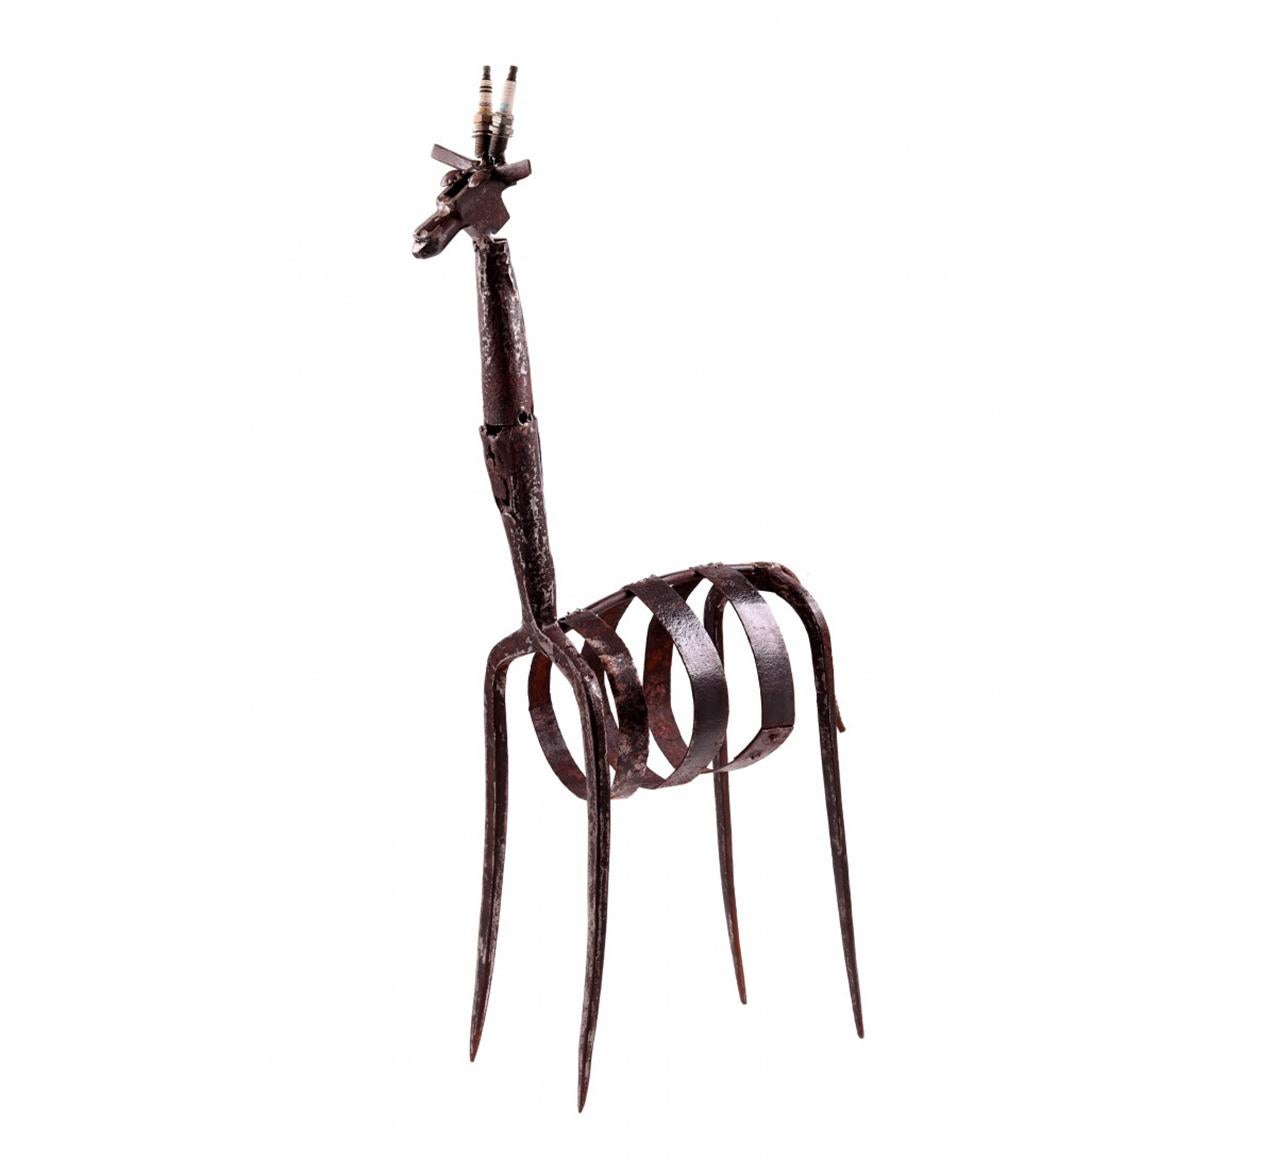 JOSÉ JERÓNIMO Abstract Sculpture - Contemporary Giraffe Sculpture Iron & Mixed Media w use of tools & other objects